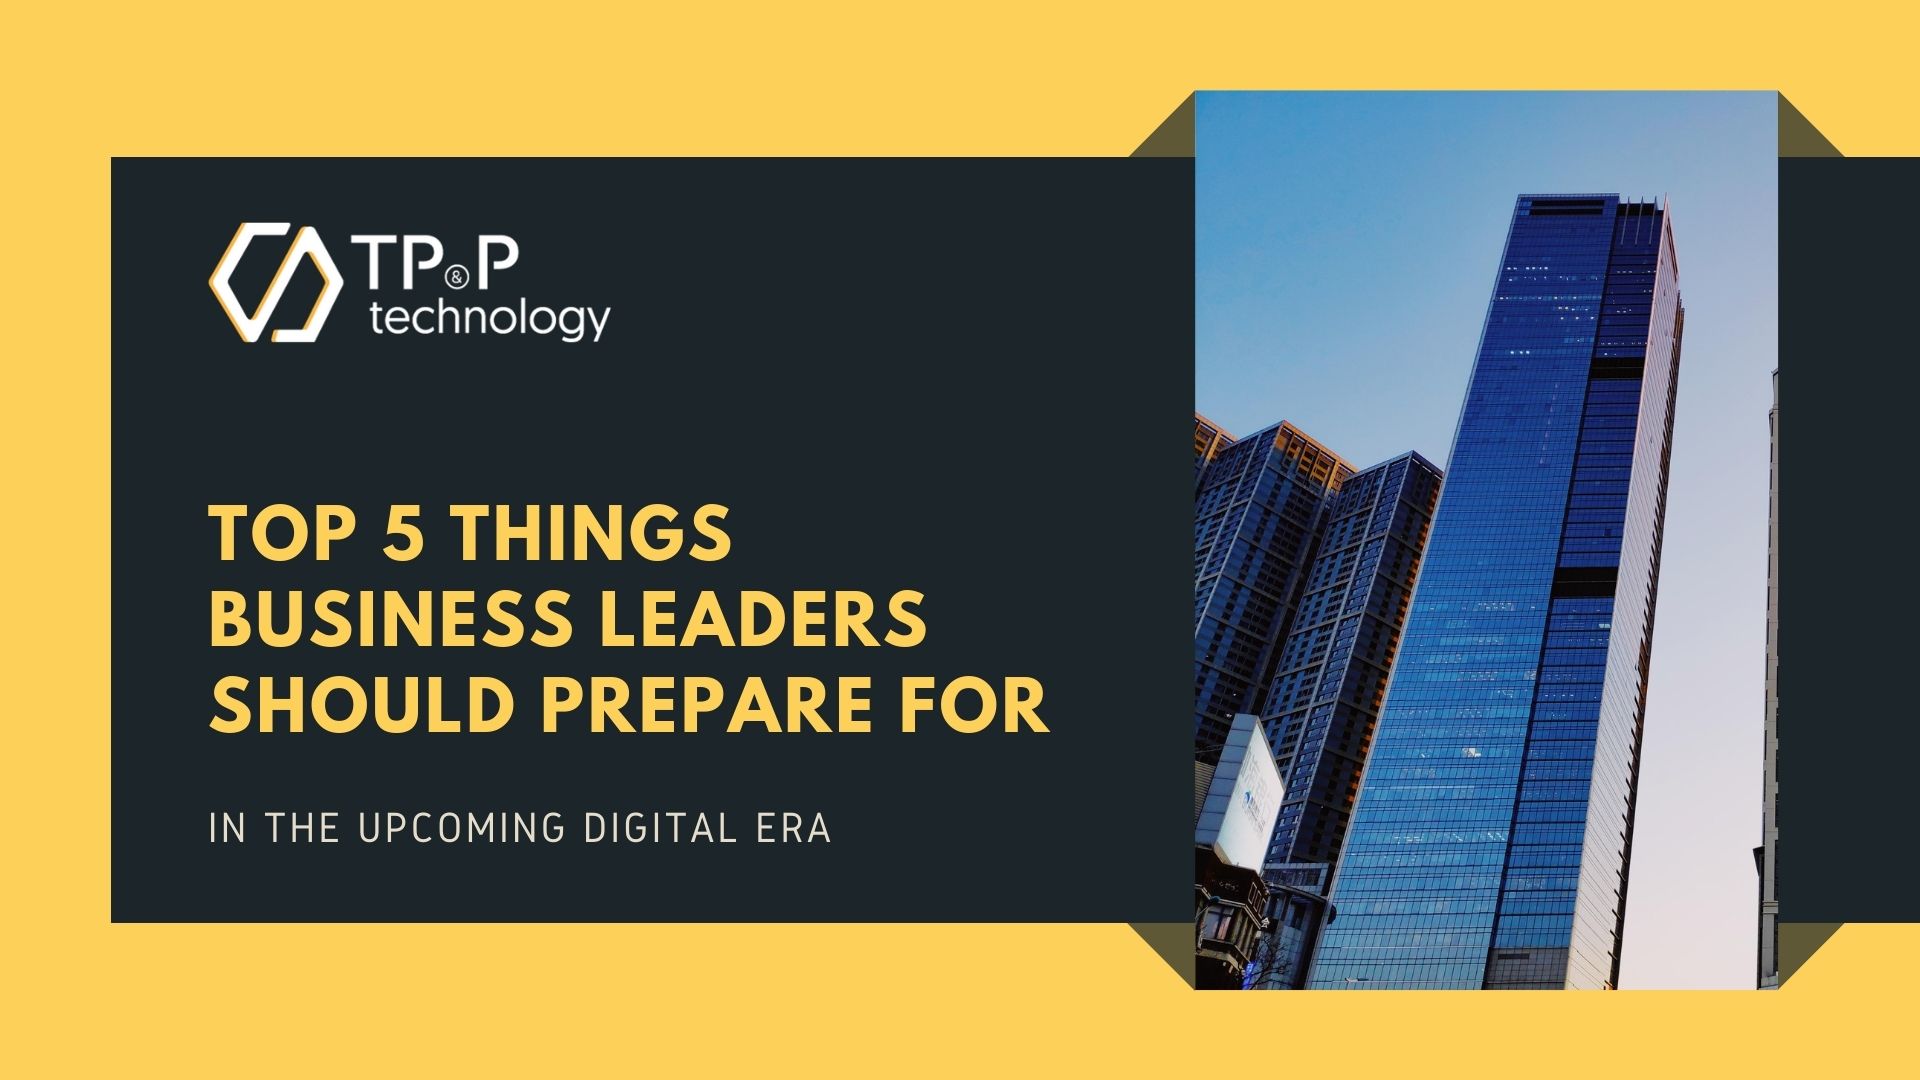 Top 5 Things Business Leaders Should Prepare For In The Upcoming Digital Era